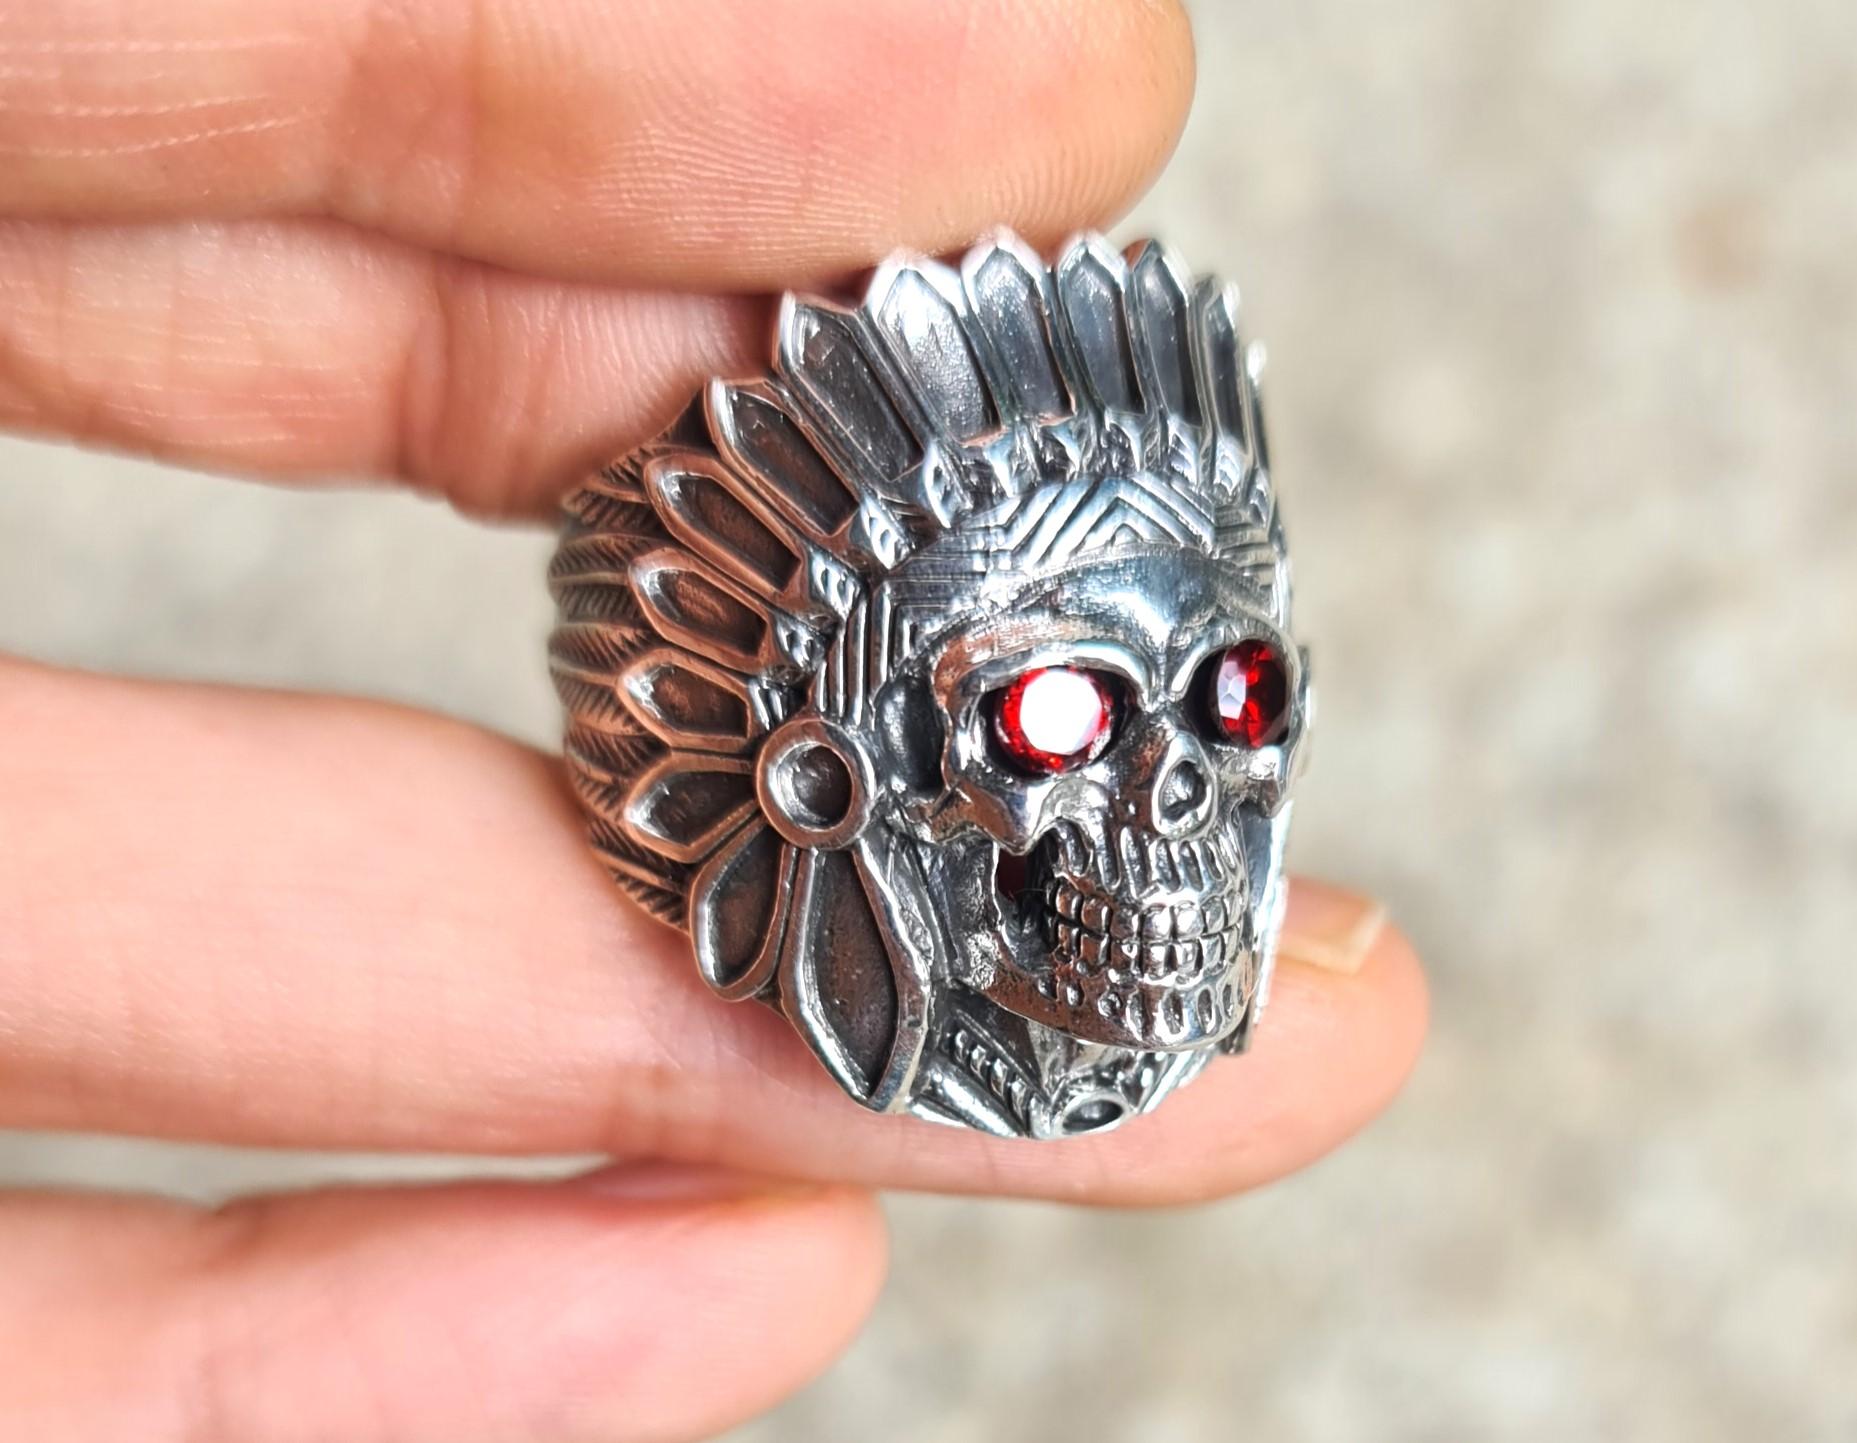 Garnet Eyes American Indian Skull Tribal Chief Warrior Ring Sterling Silver 925 For Sale 5